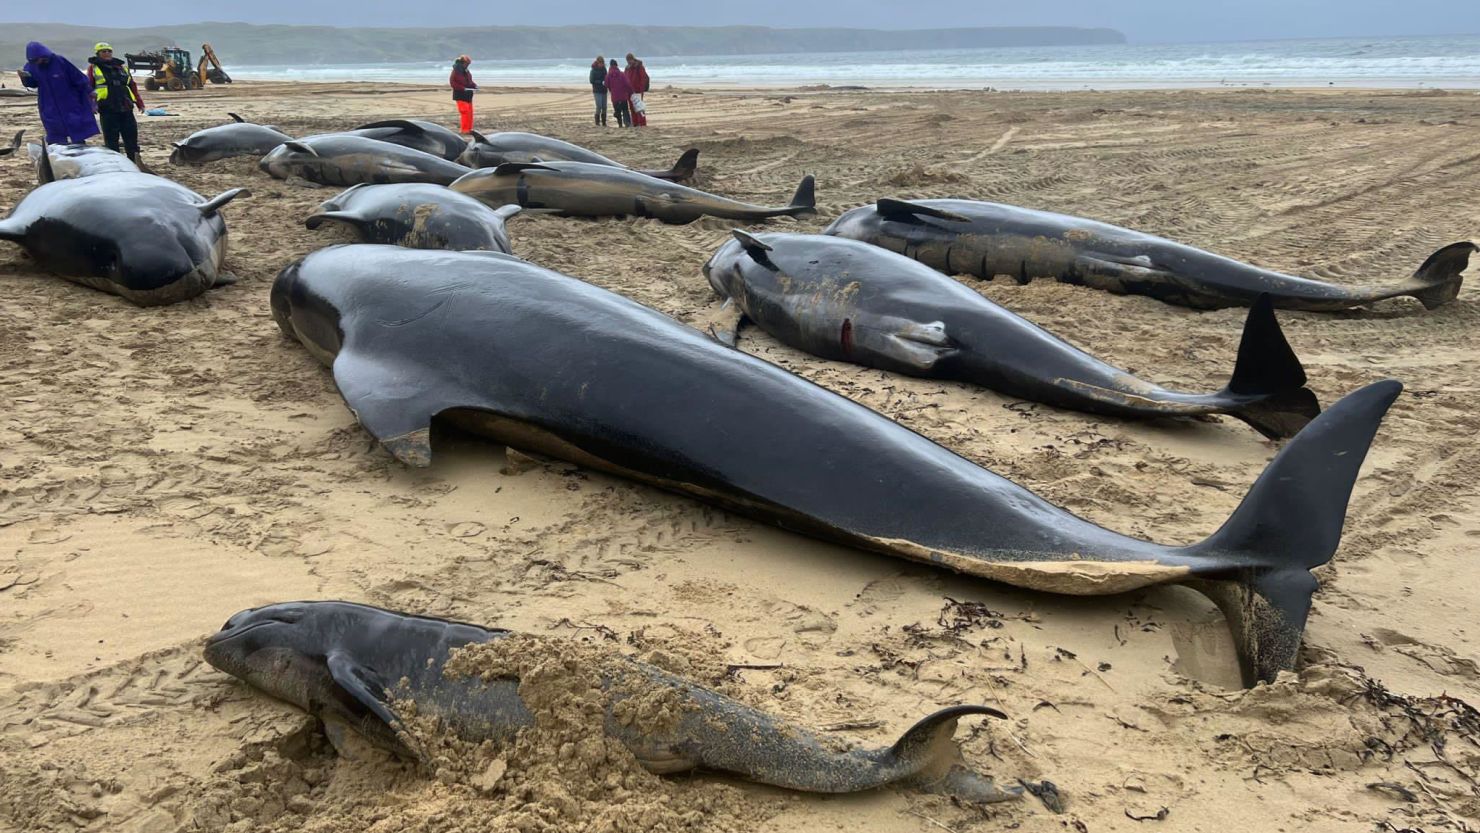 The pilot whales were found stranded on a beach on the Scottish Isle of Lewis.